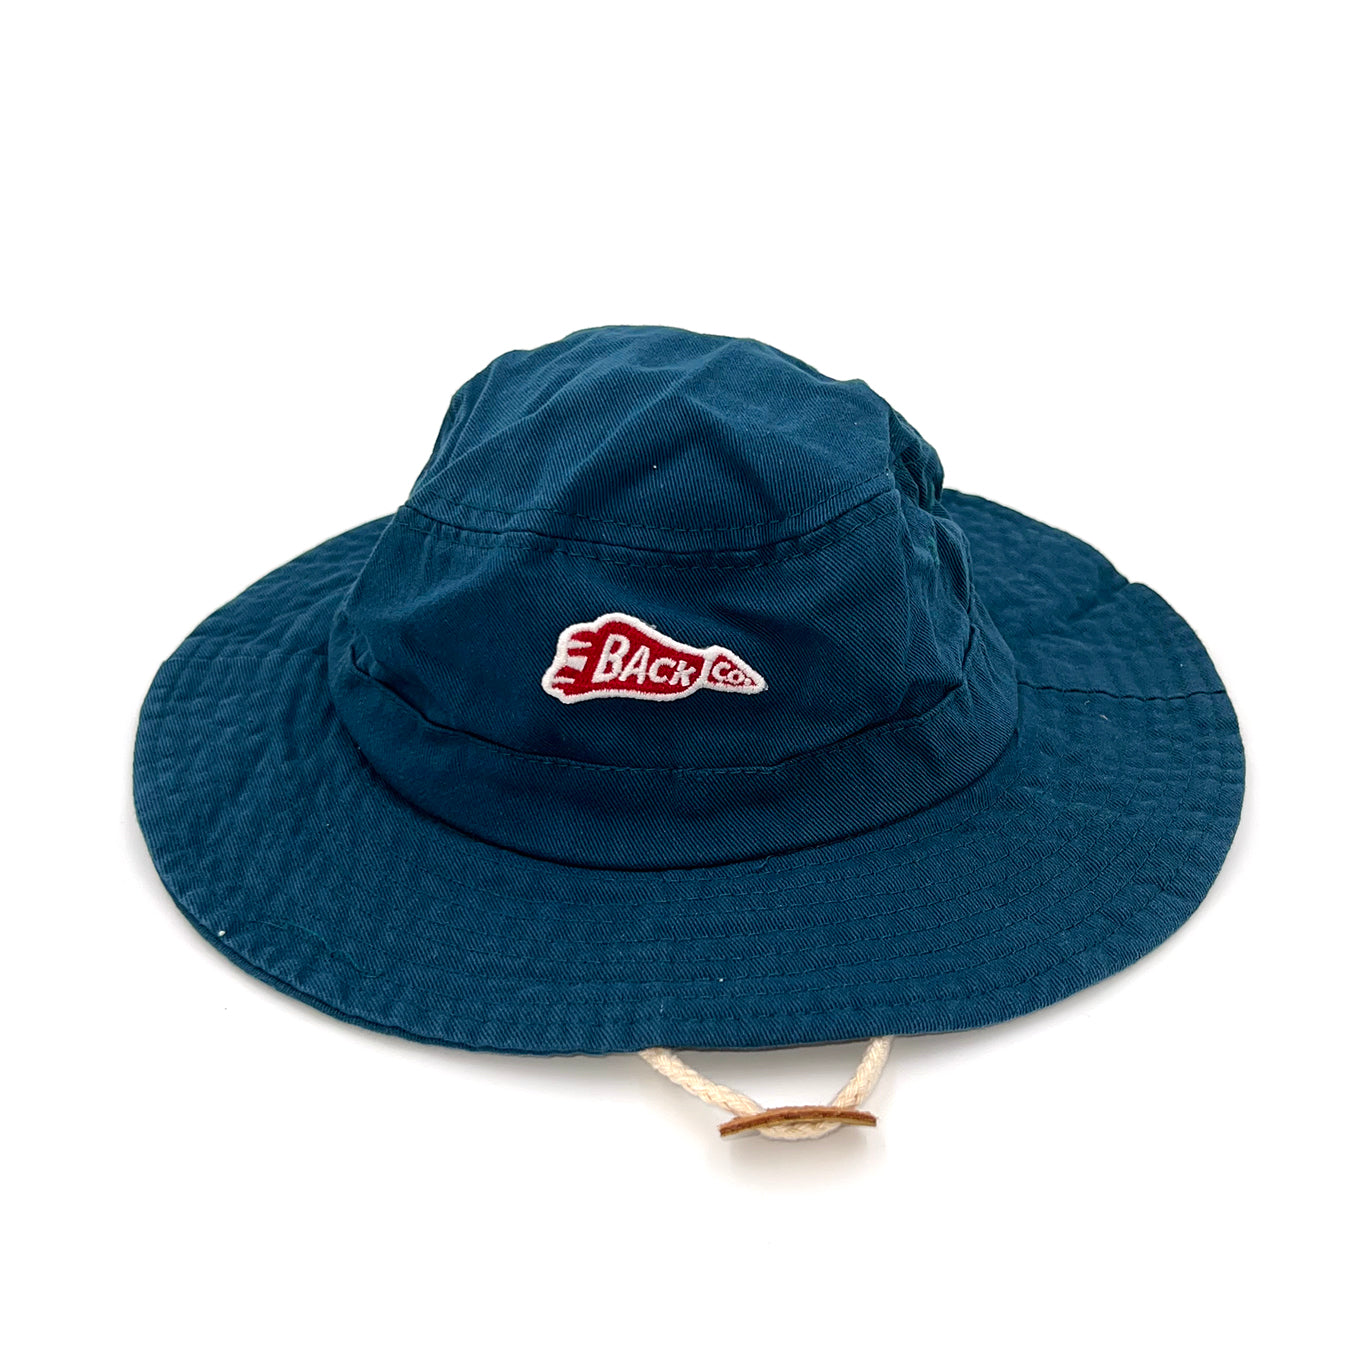 Back Boonie Hat